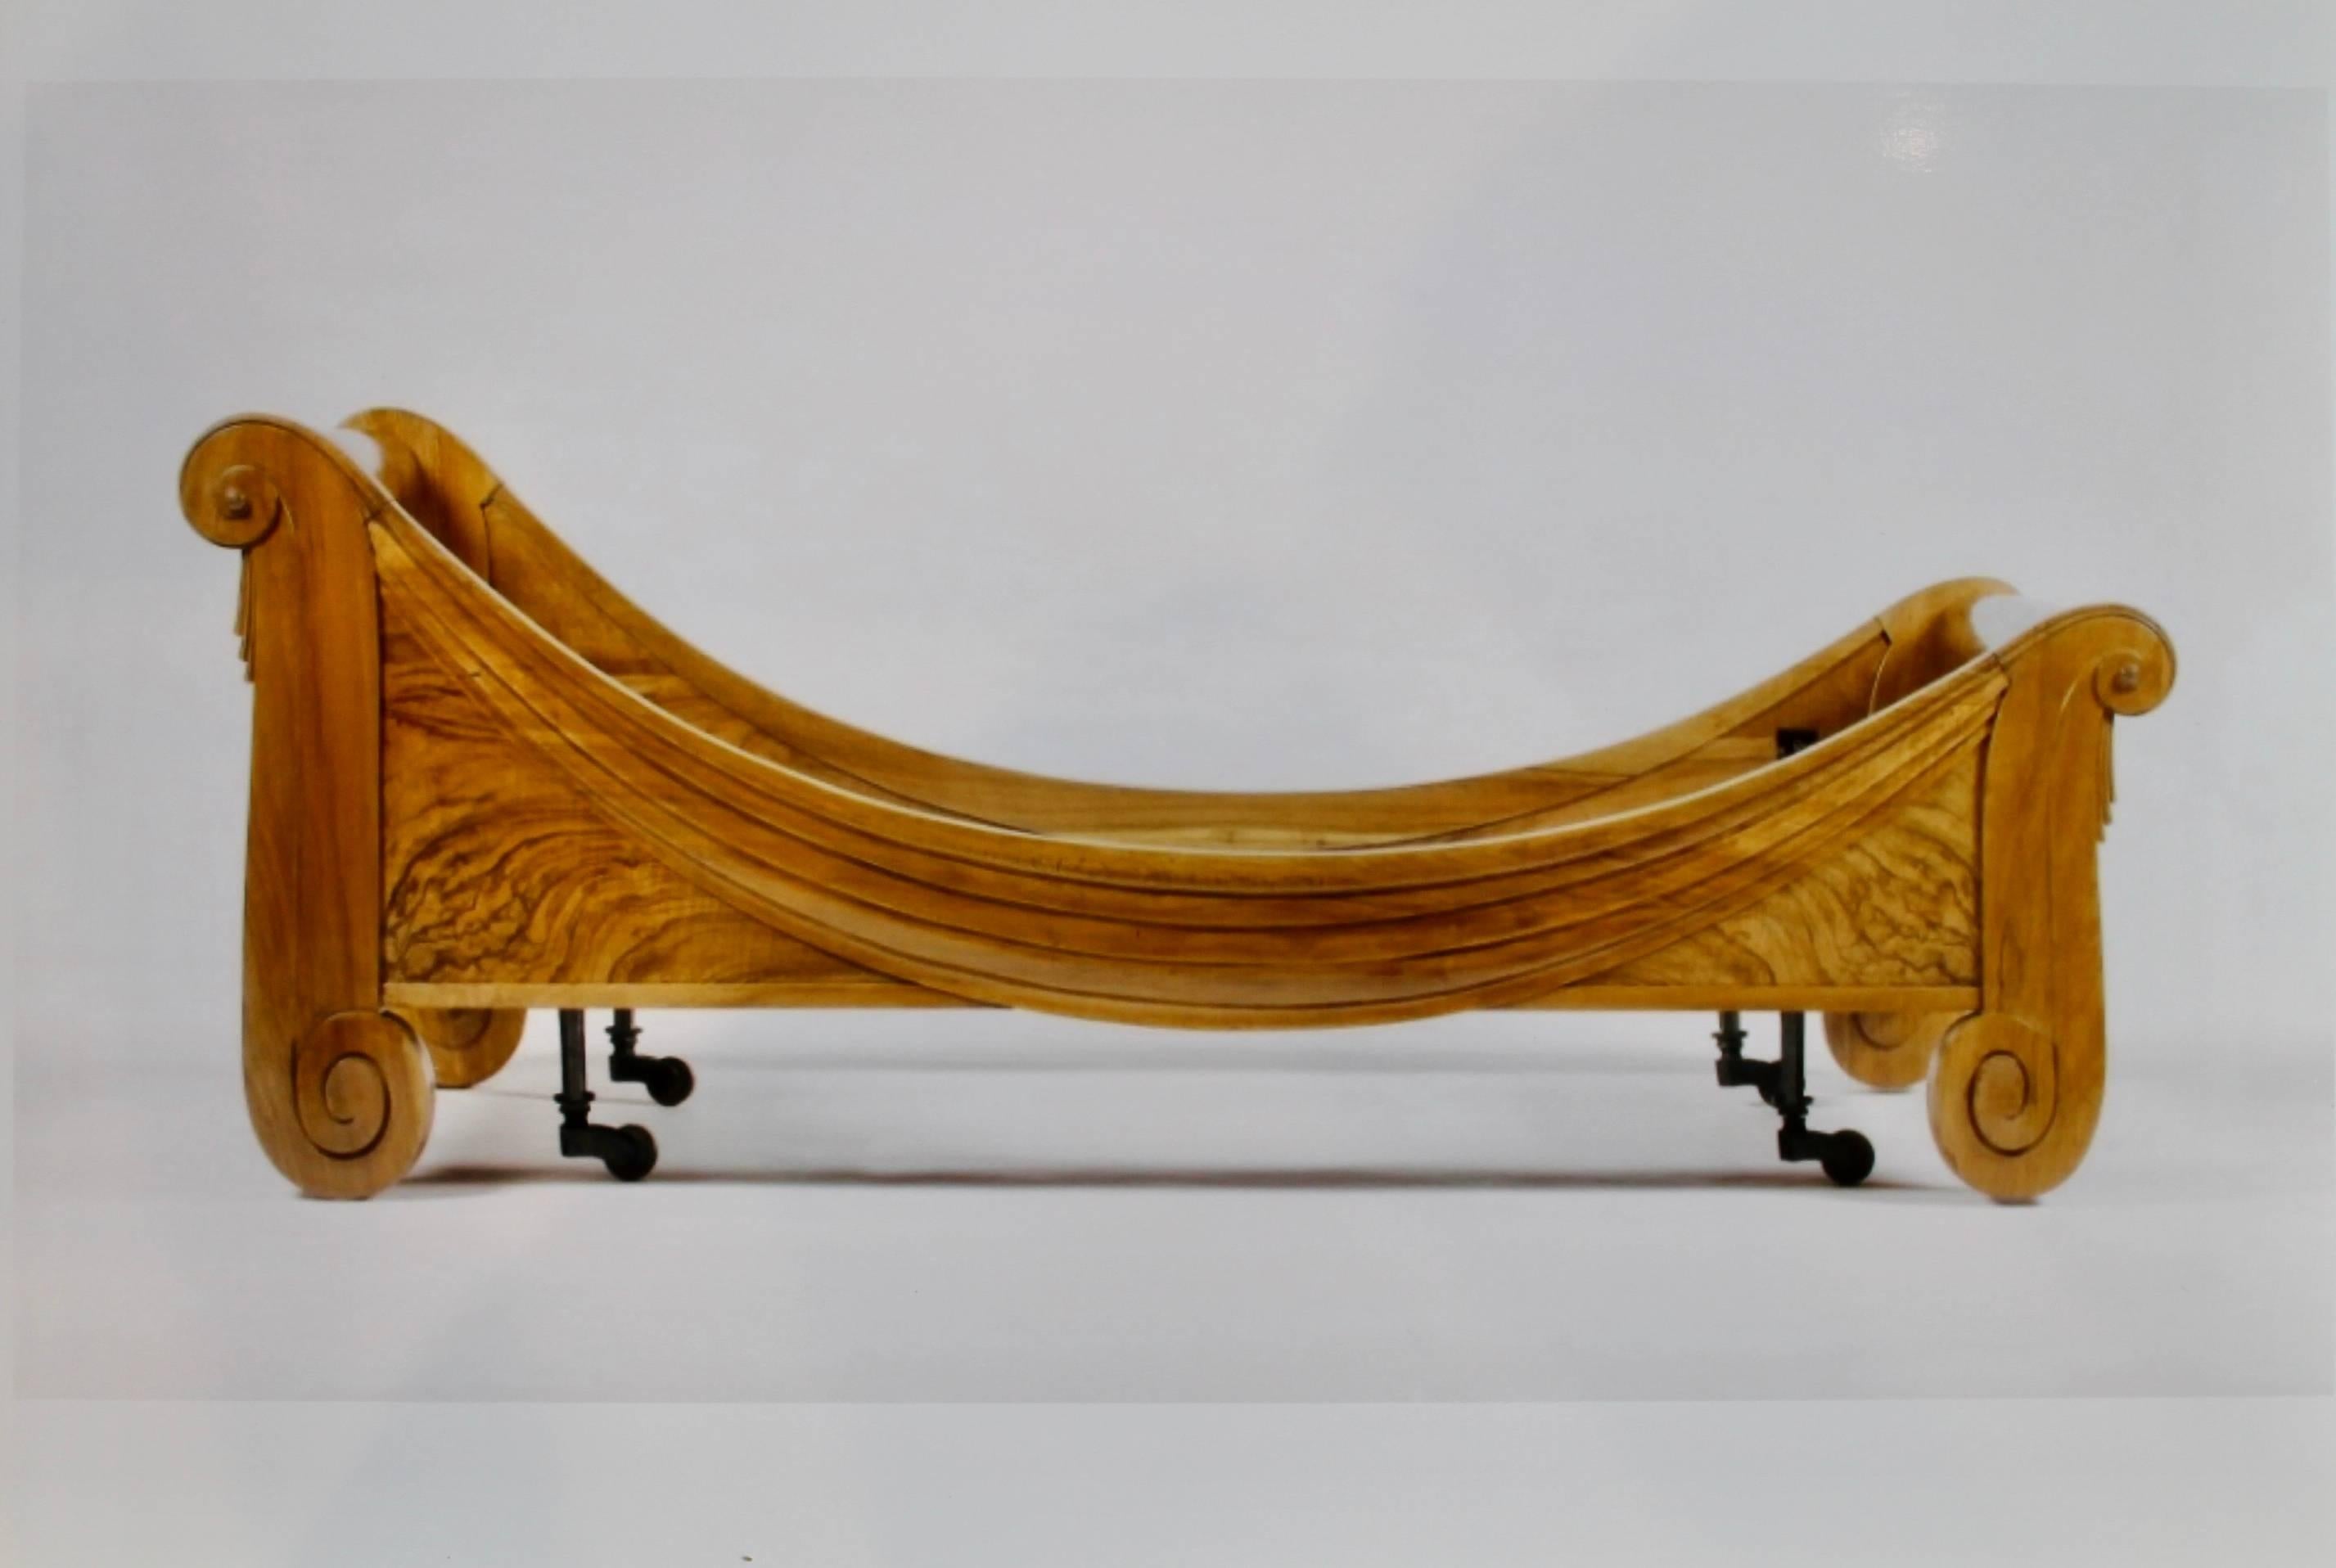 The frames of solid and veneered burr walnut carved with drapes.

Literature: Florence Camard, Sue et Mare et La Compagnie des Arts Francais, ed. de l'Amateur, Paris, 1993, page 108 for the design and page 288 for a period photograph of a bed of